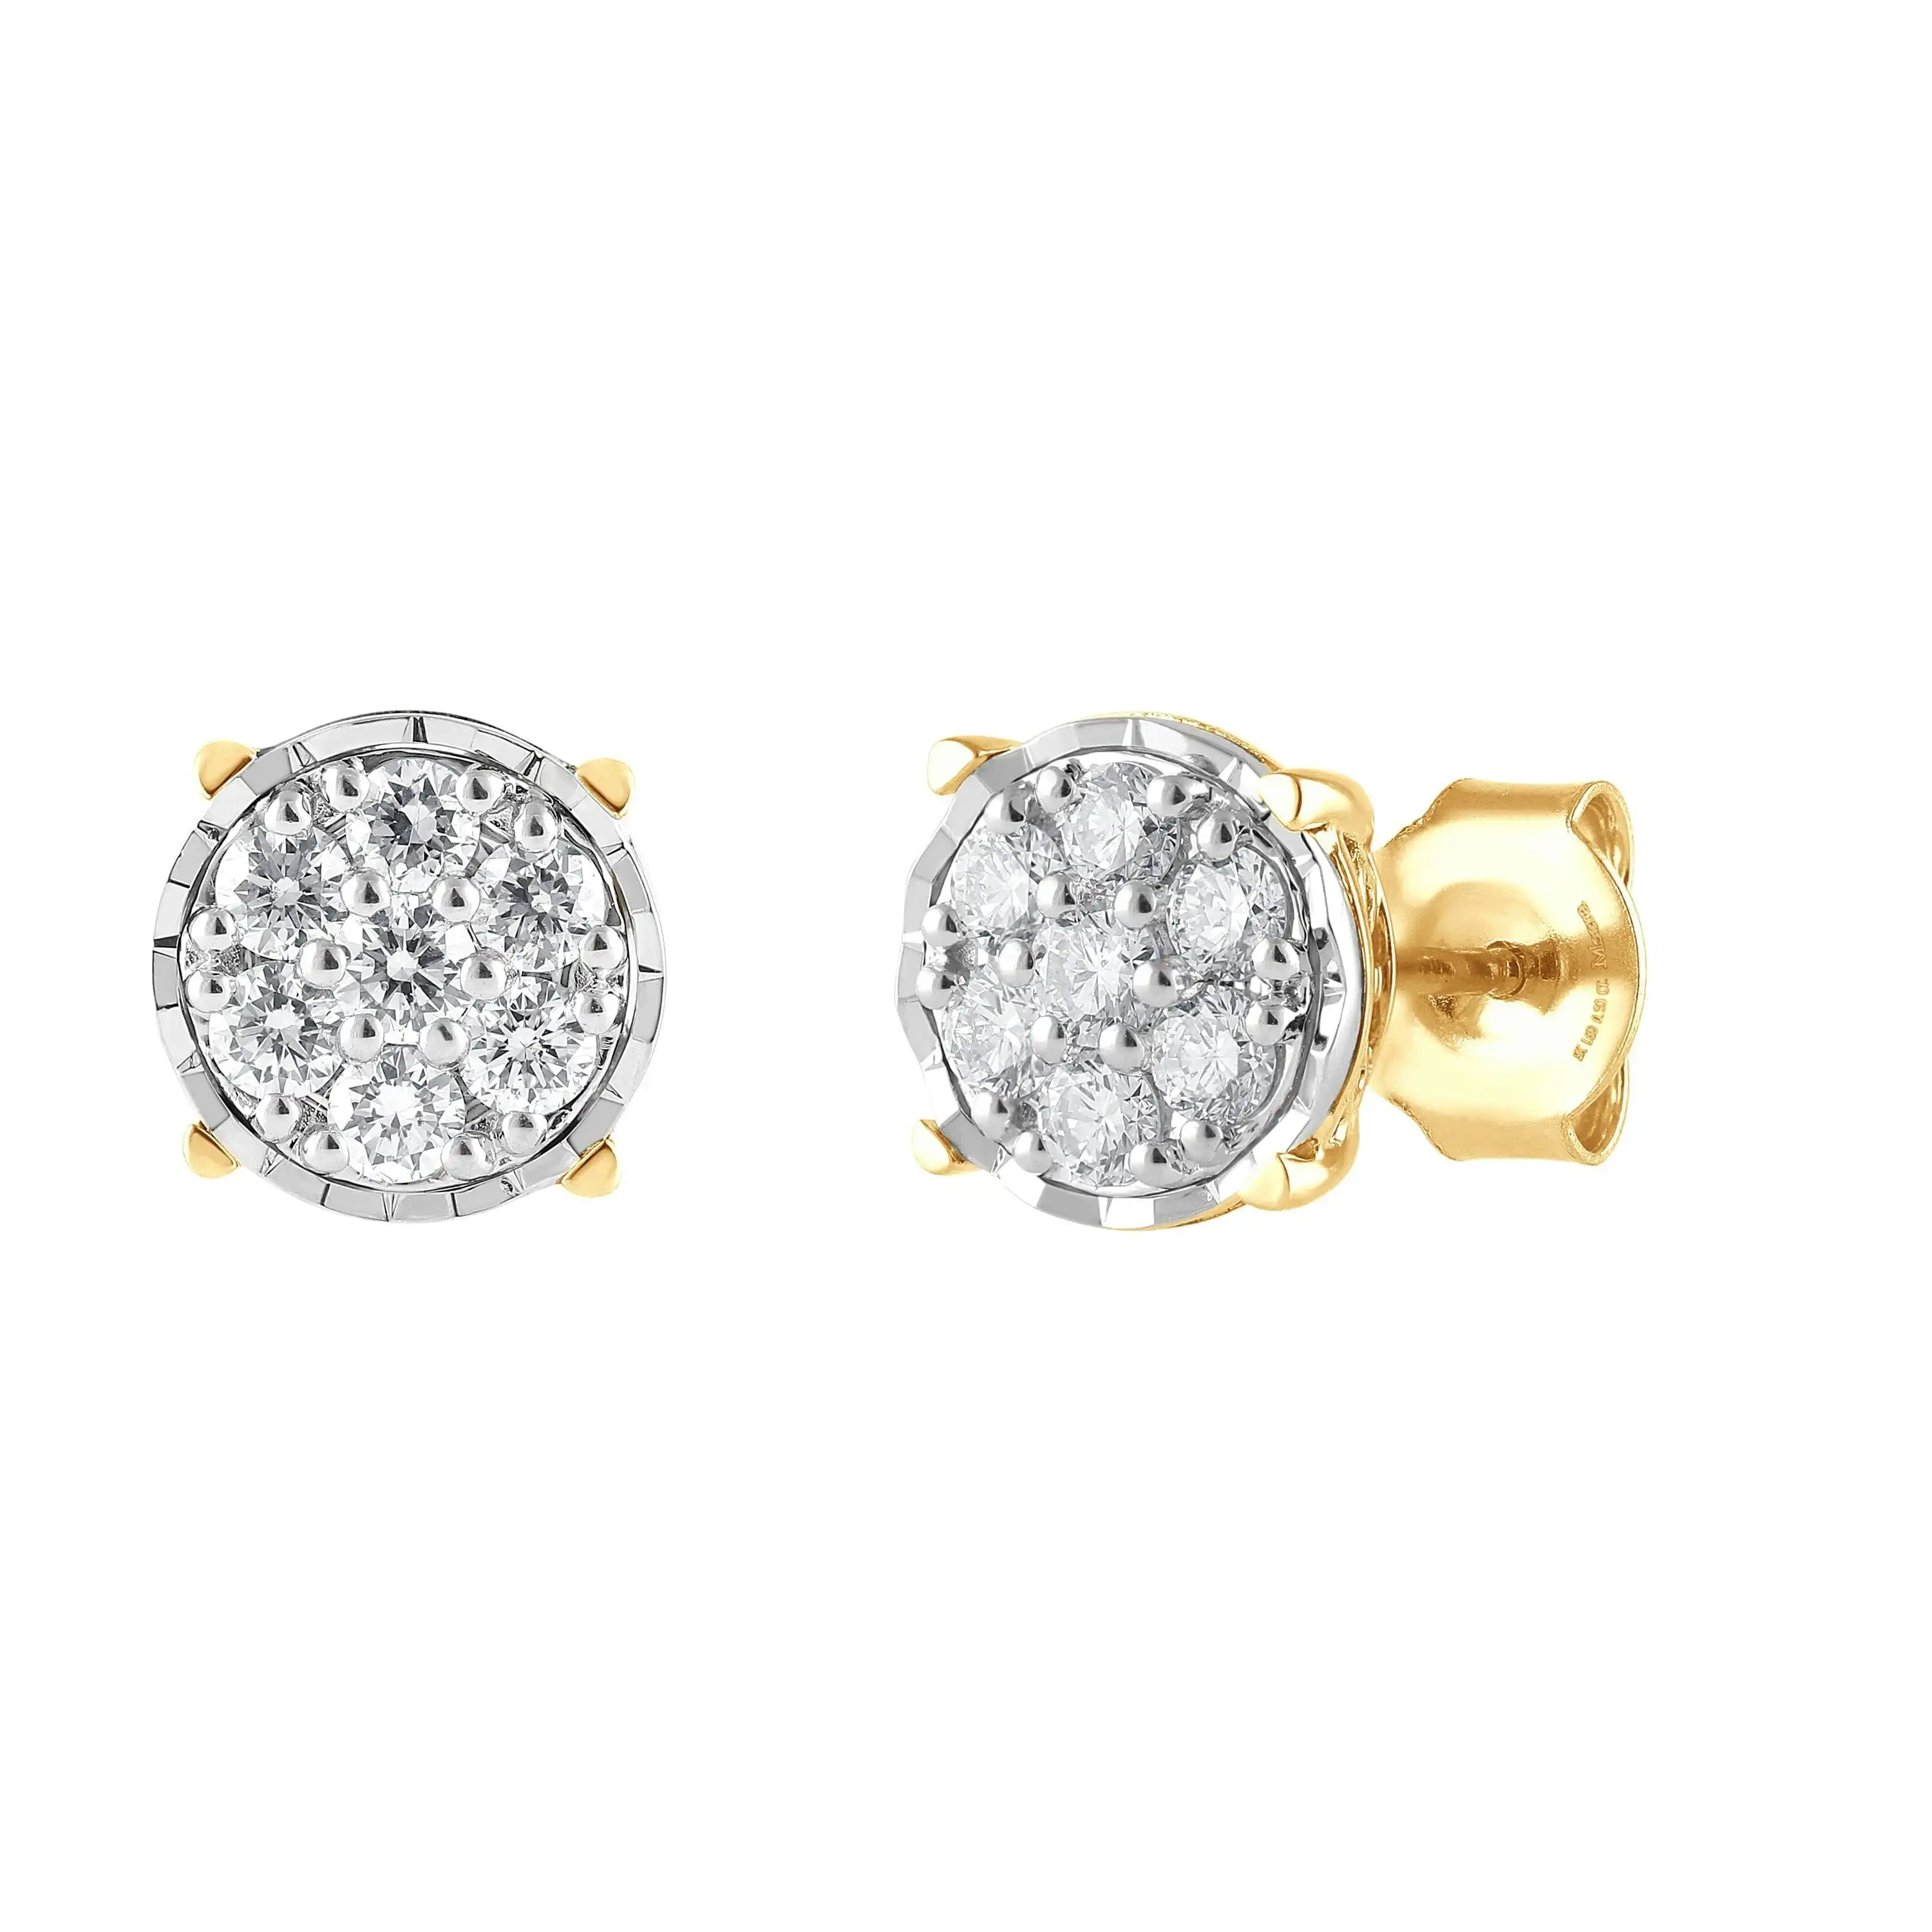 Meera Flower Composite Earrings with 1/2ct of Laboratory Grown Diamonds in 9ct Yellow Gold